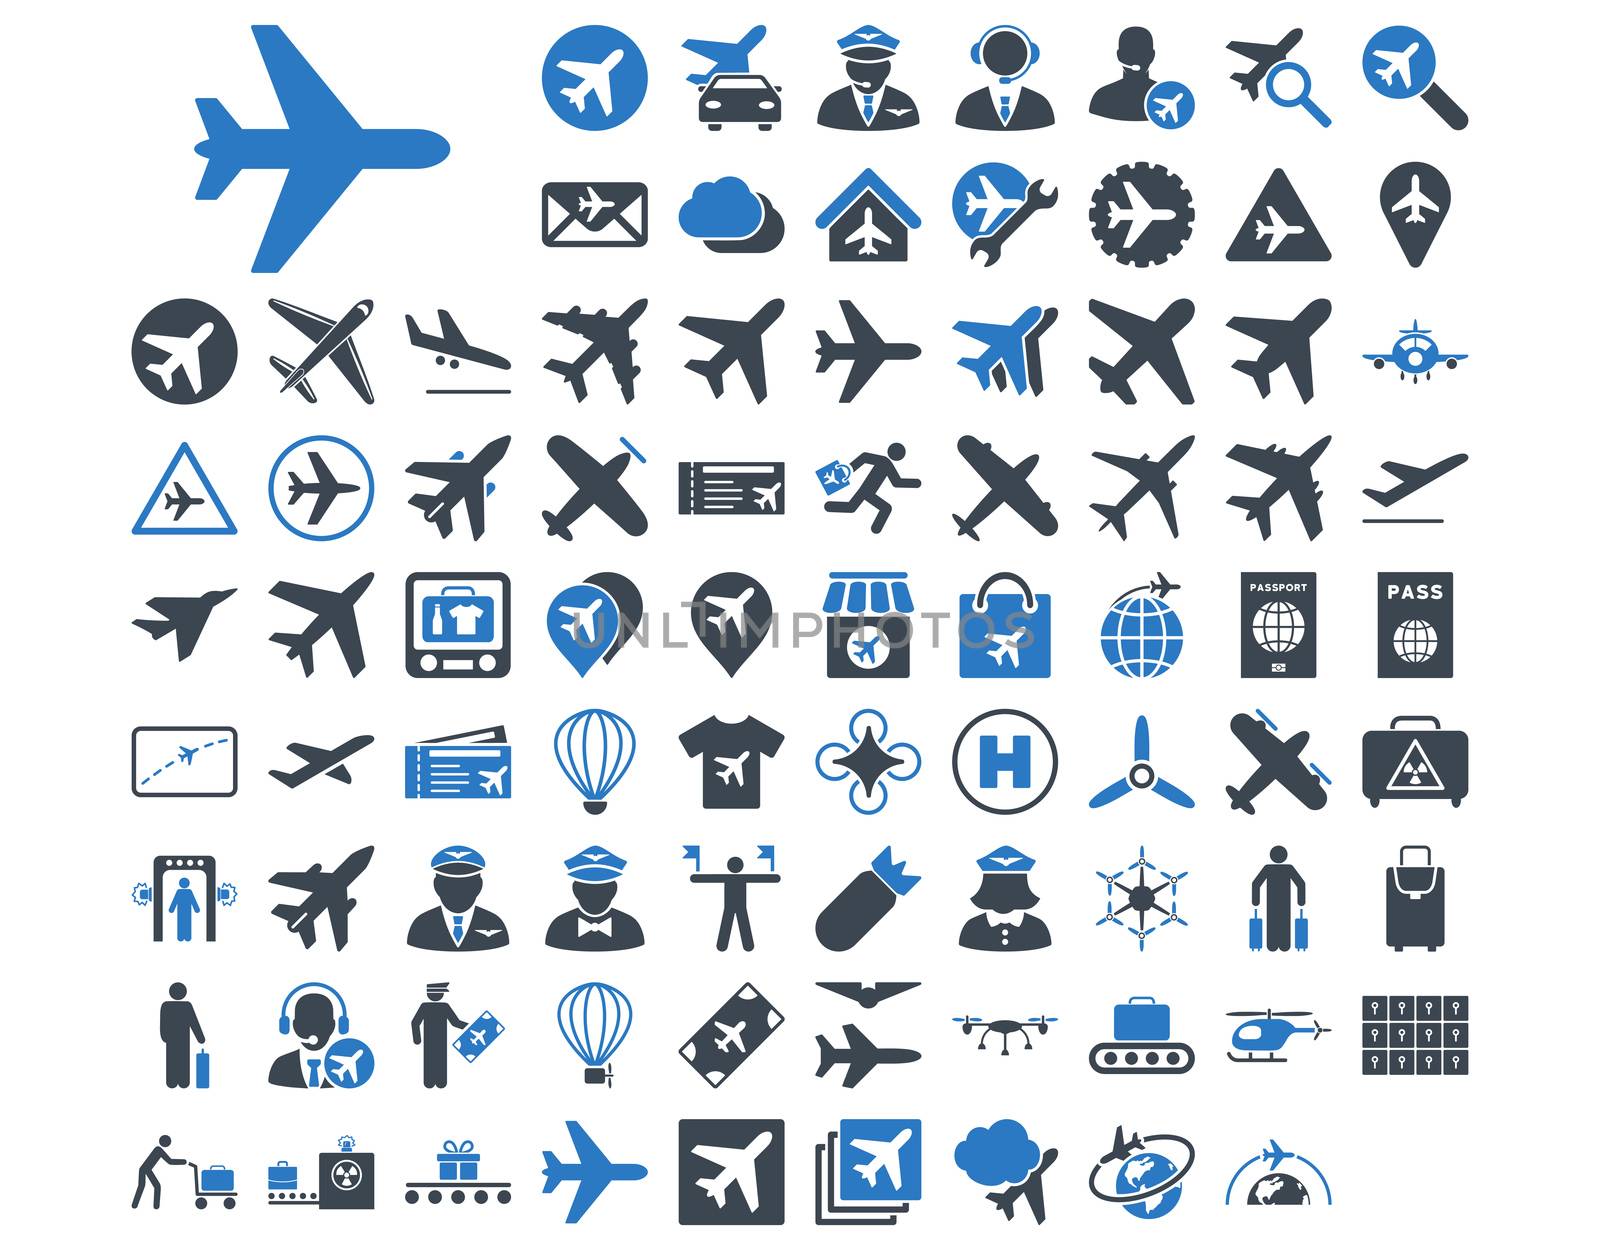 Aviation Icon Set. These flat bicolor icons use smooth blue colors. Raster images are isolated on a white background.